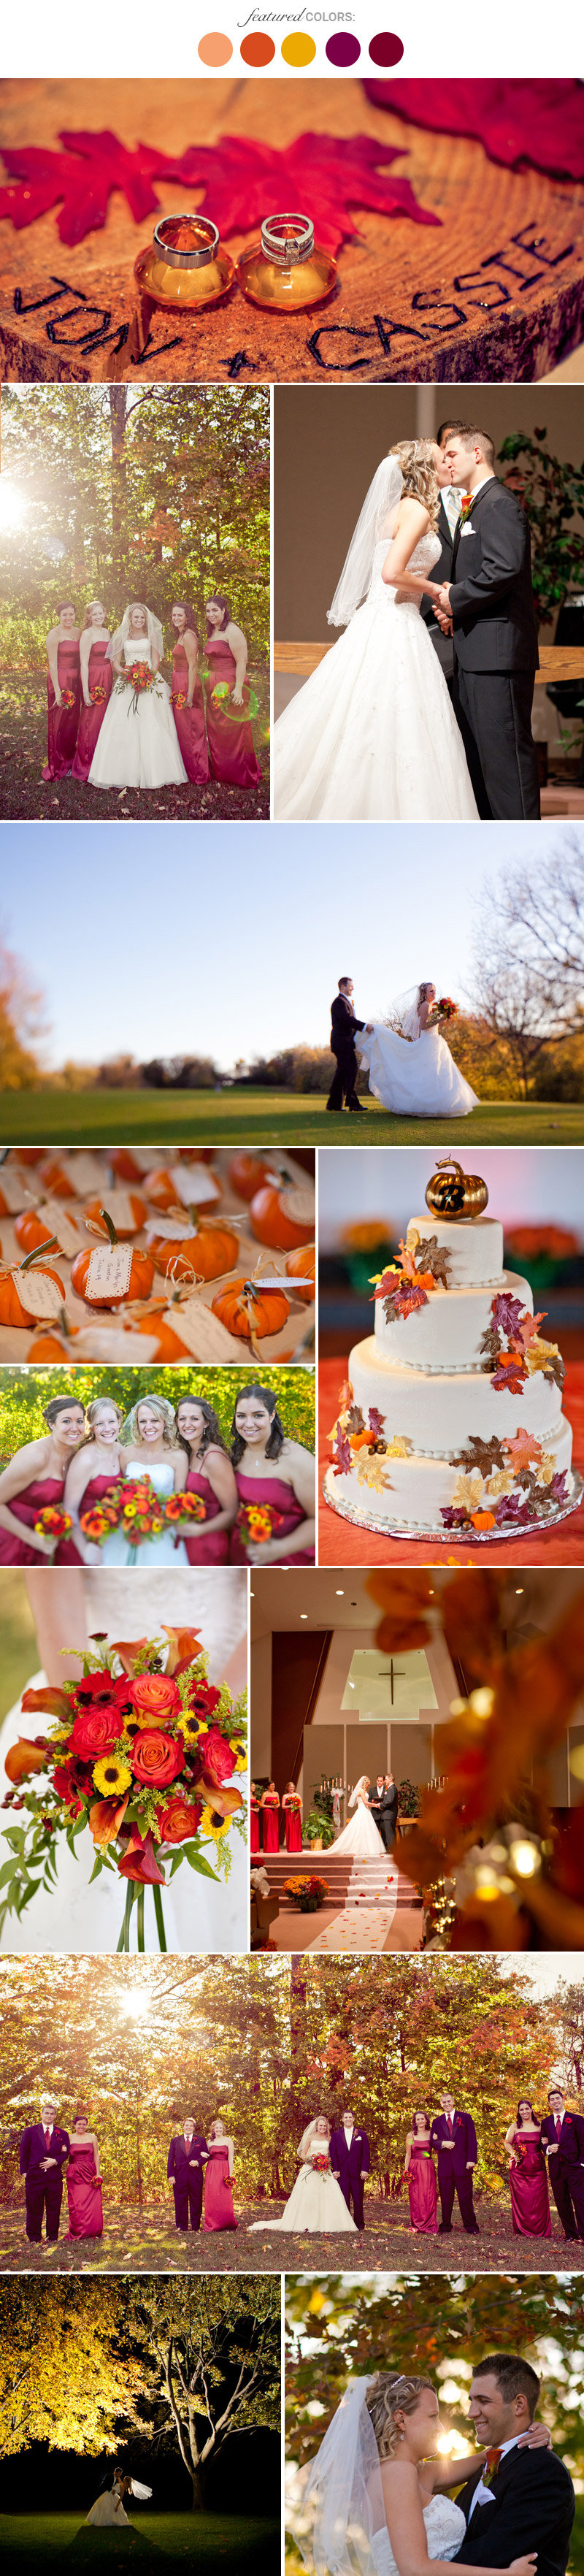 Awesome Fall Wedding Color Palettes Gallery Styles Coloring Wallpapers Download Free Images Wallpaper [coloring365.blogspot.com]